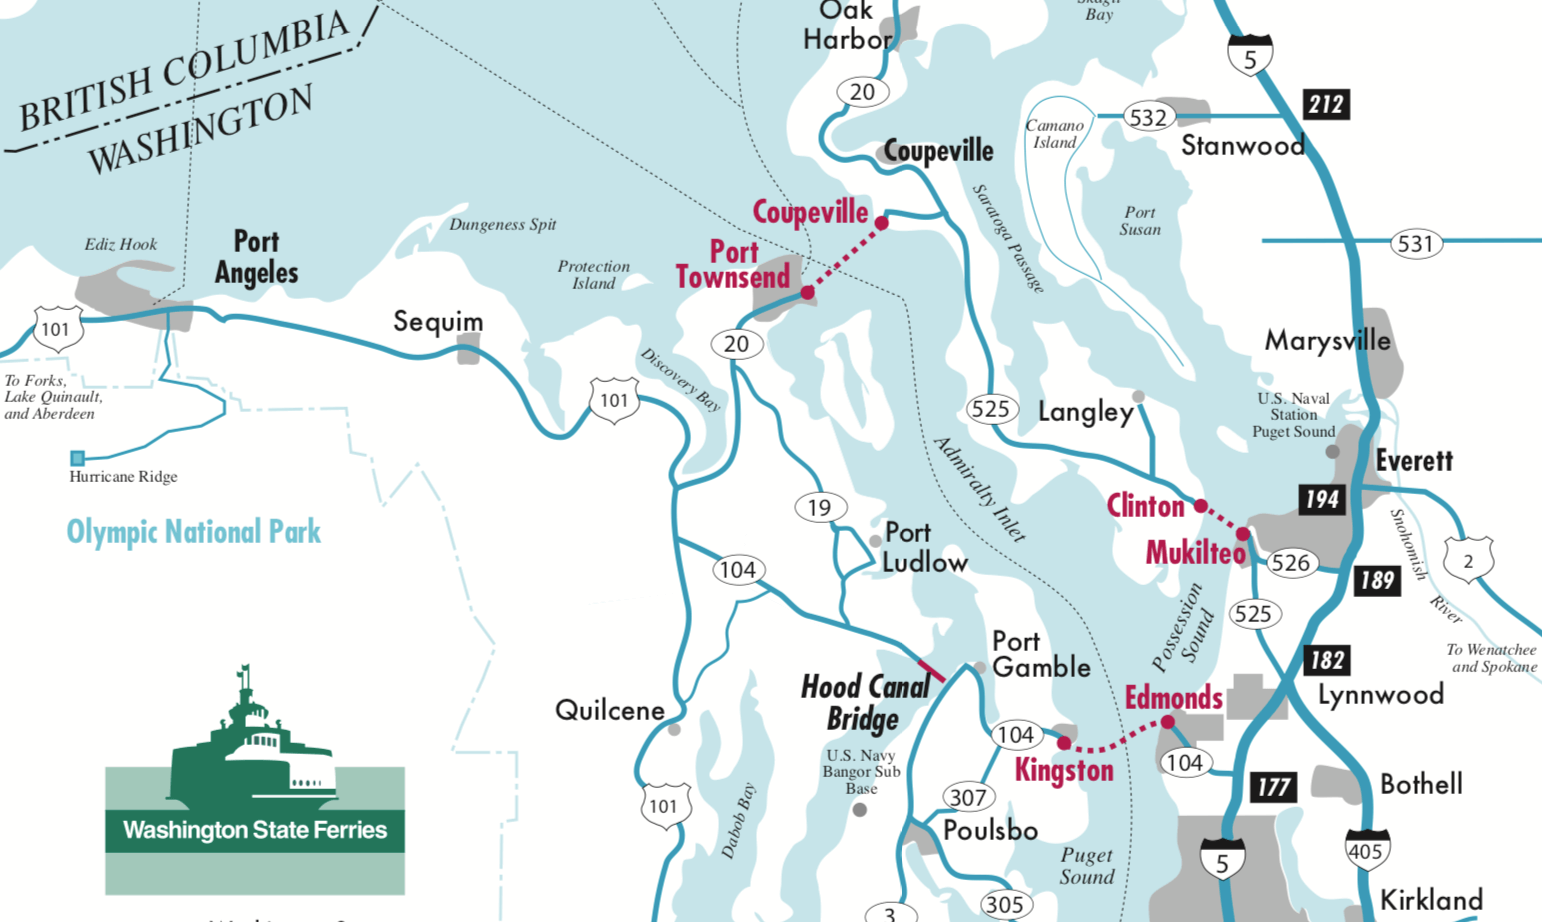 This is a ferry map for the Washington State Ferry system and covers the middle section of the service in and around Whidbey Island and gateways to the Olympic Peninsula. The ferry routes are in dotted red lines with the ports written in red lettering while major roadways are featured in teal green color.